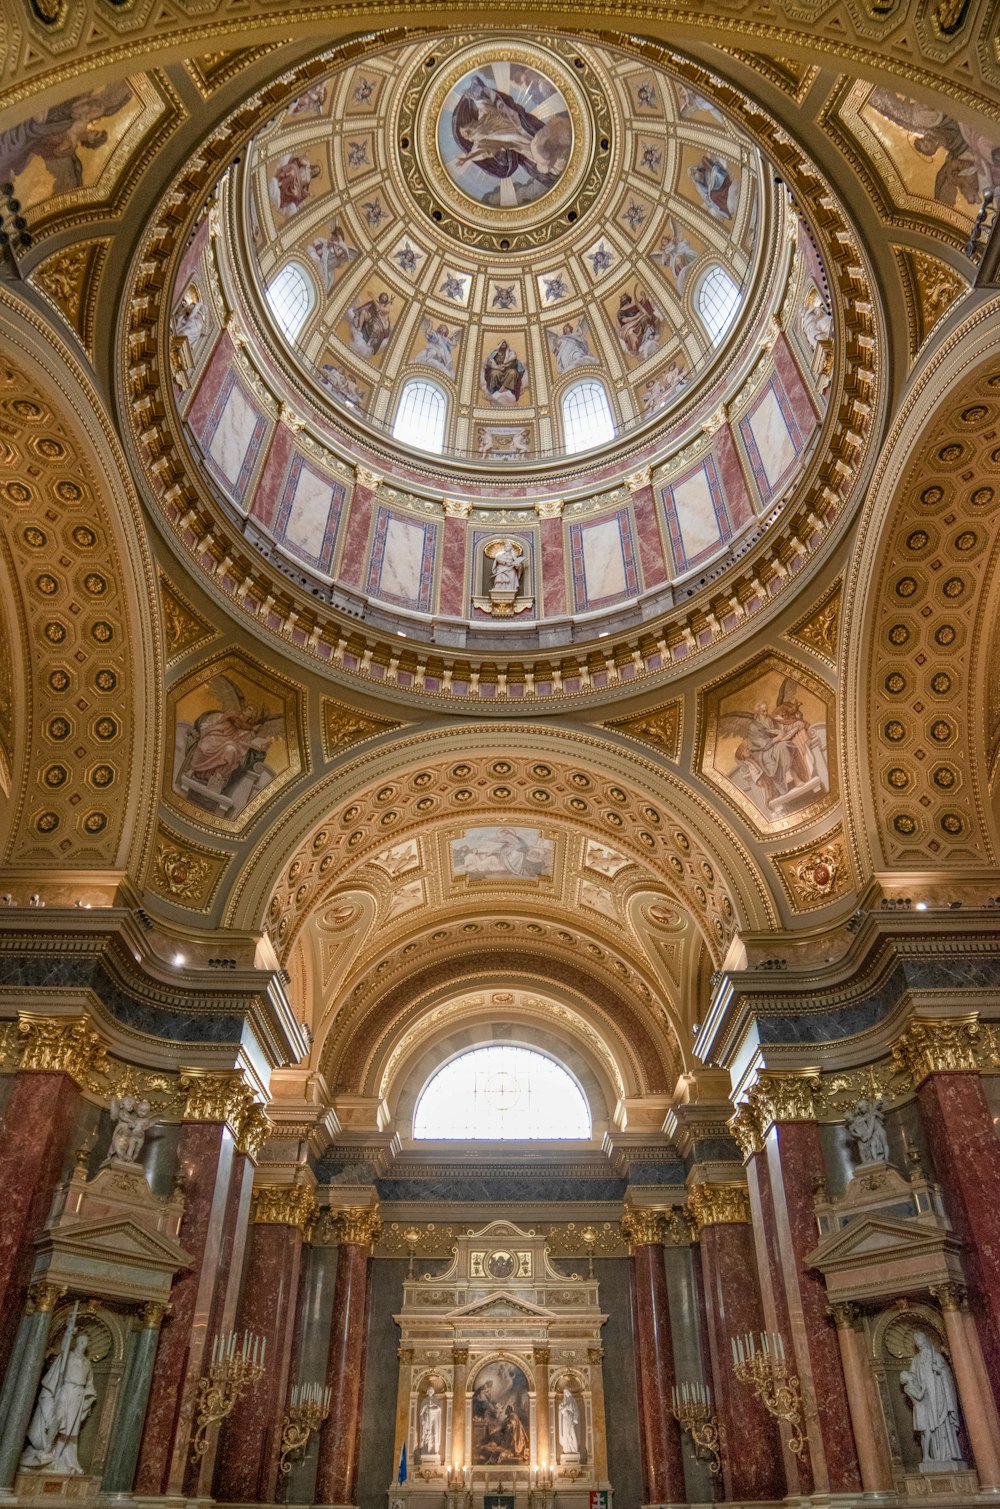 the ceiling of a large church with a dome